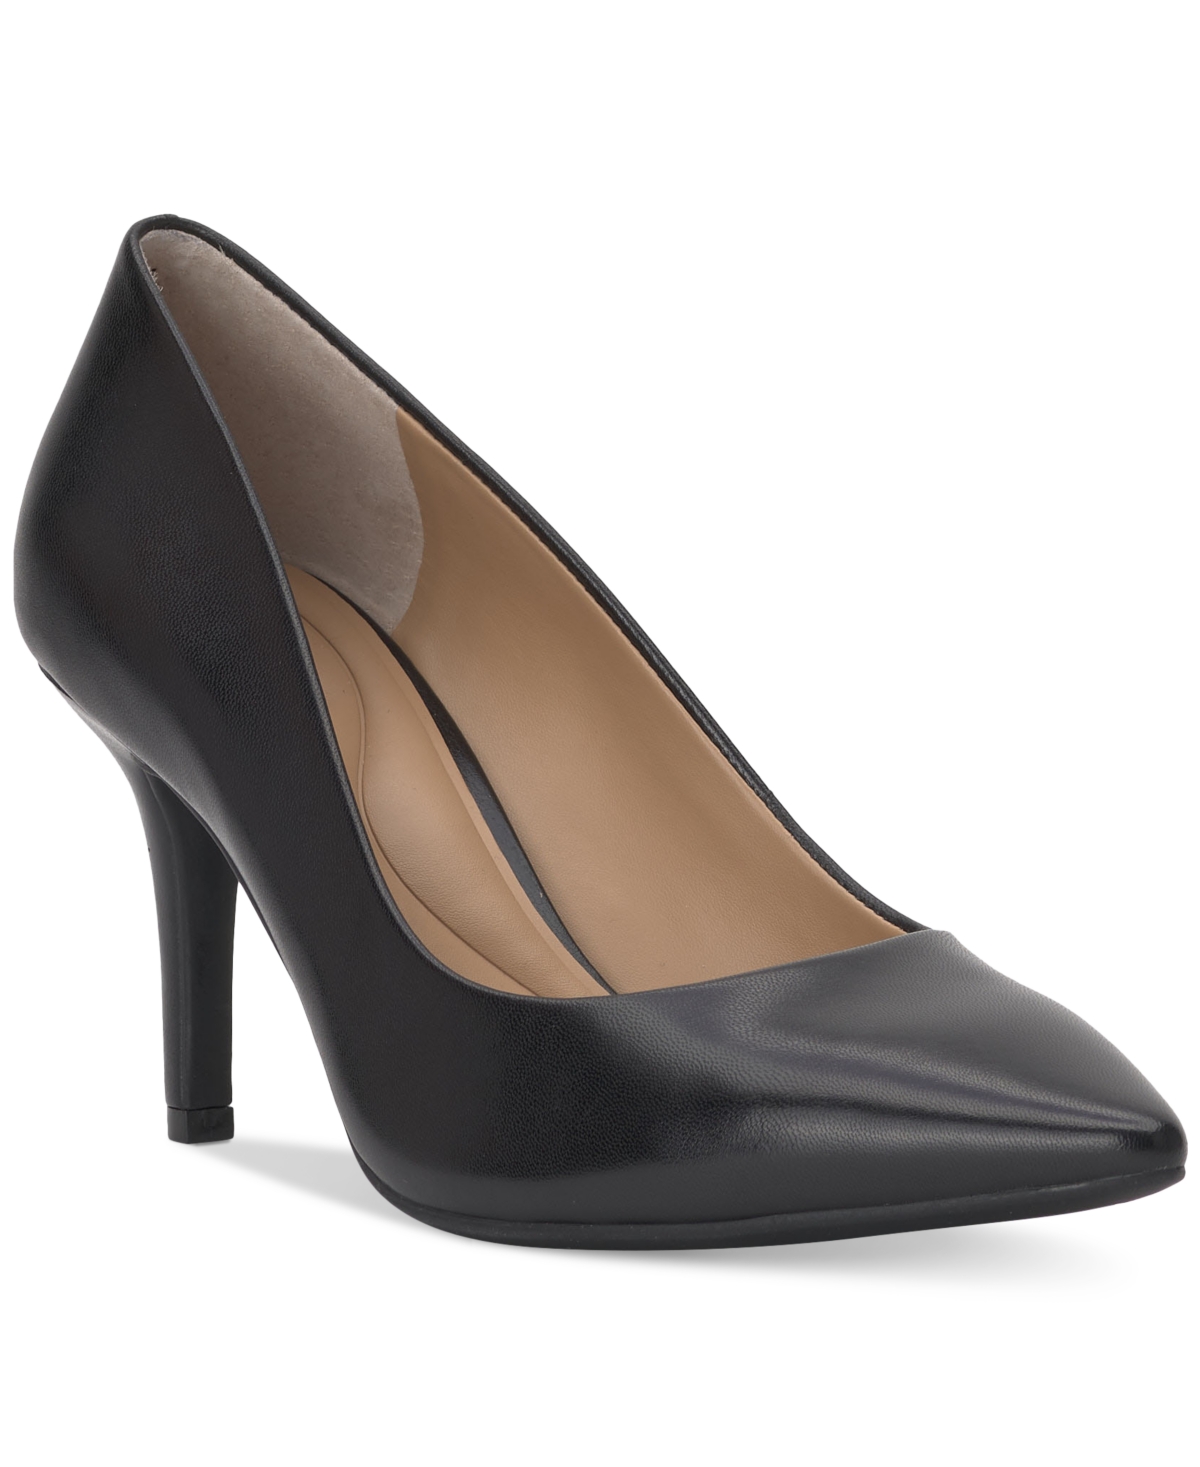 Women's Zitah Pointed Toe Pumps, Created for Macy's - Black Leather